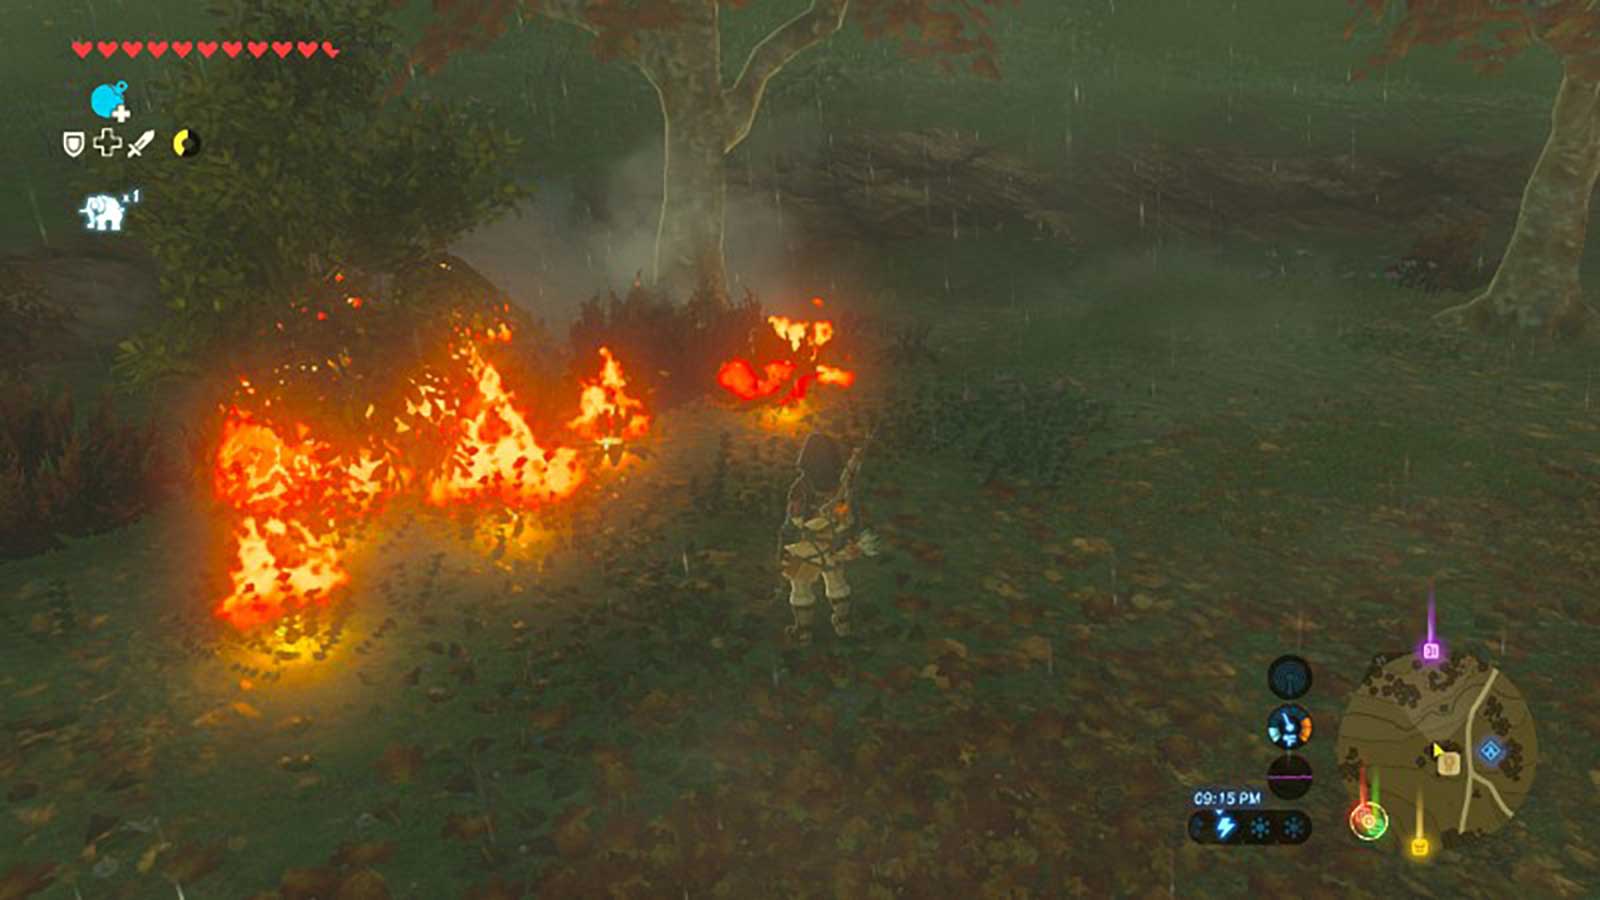 Link standing in front of burning grass and trees